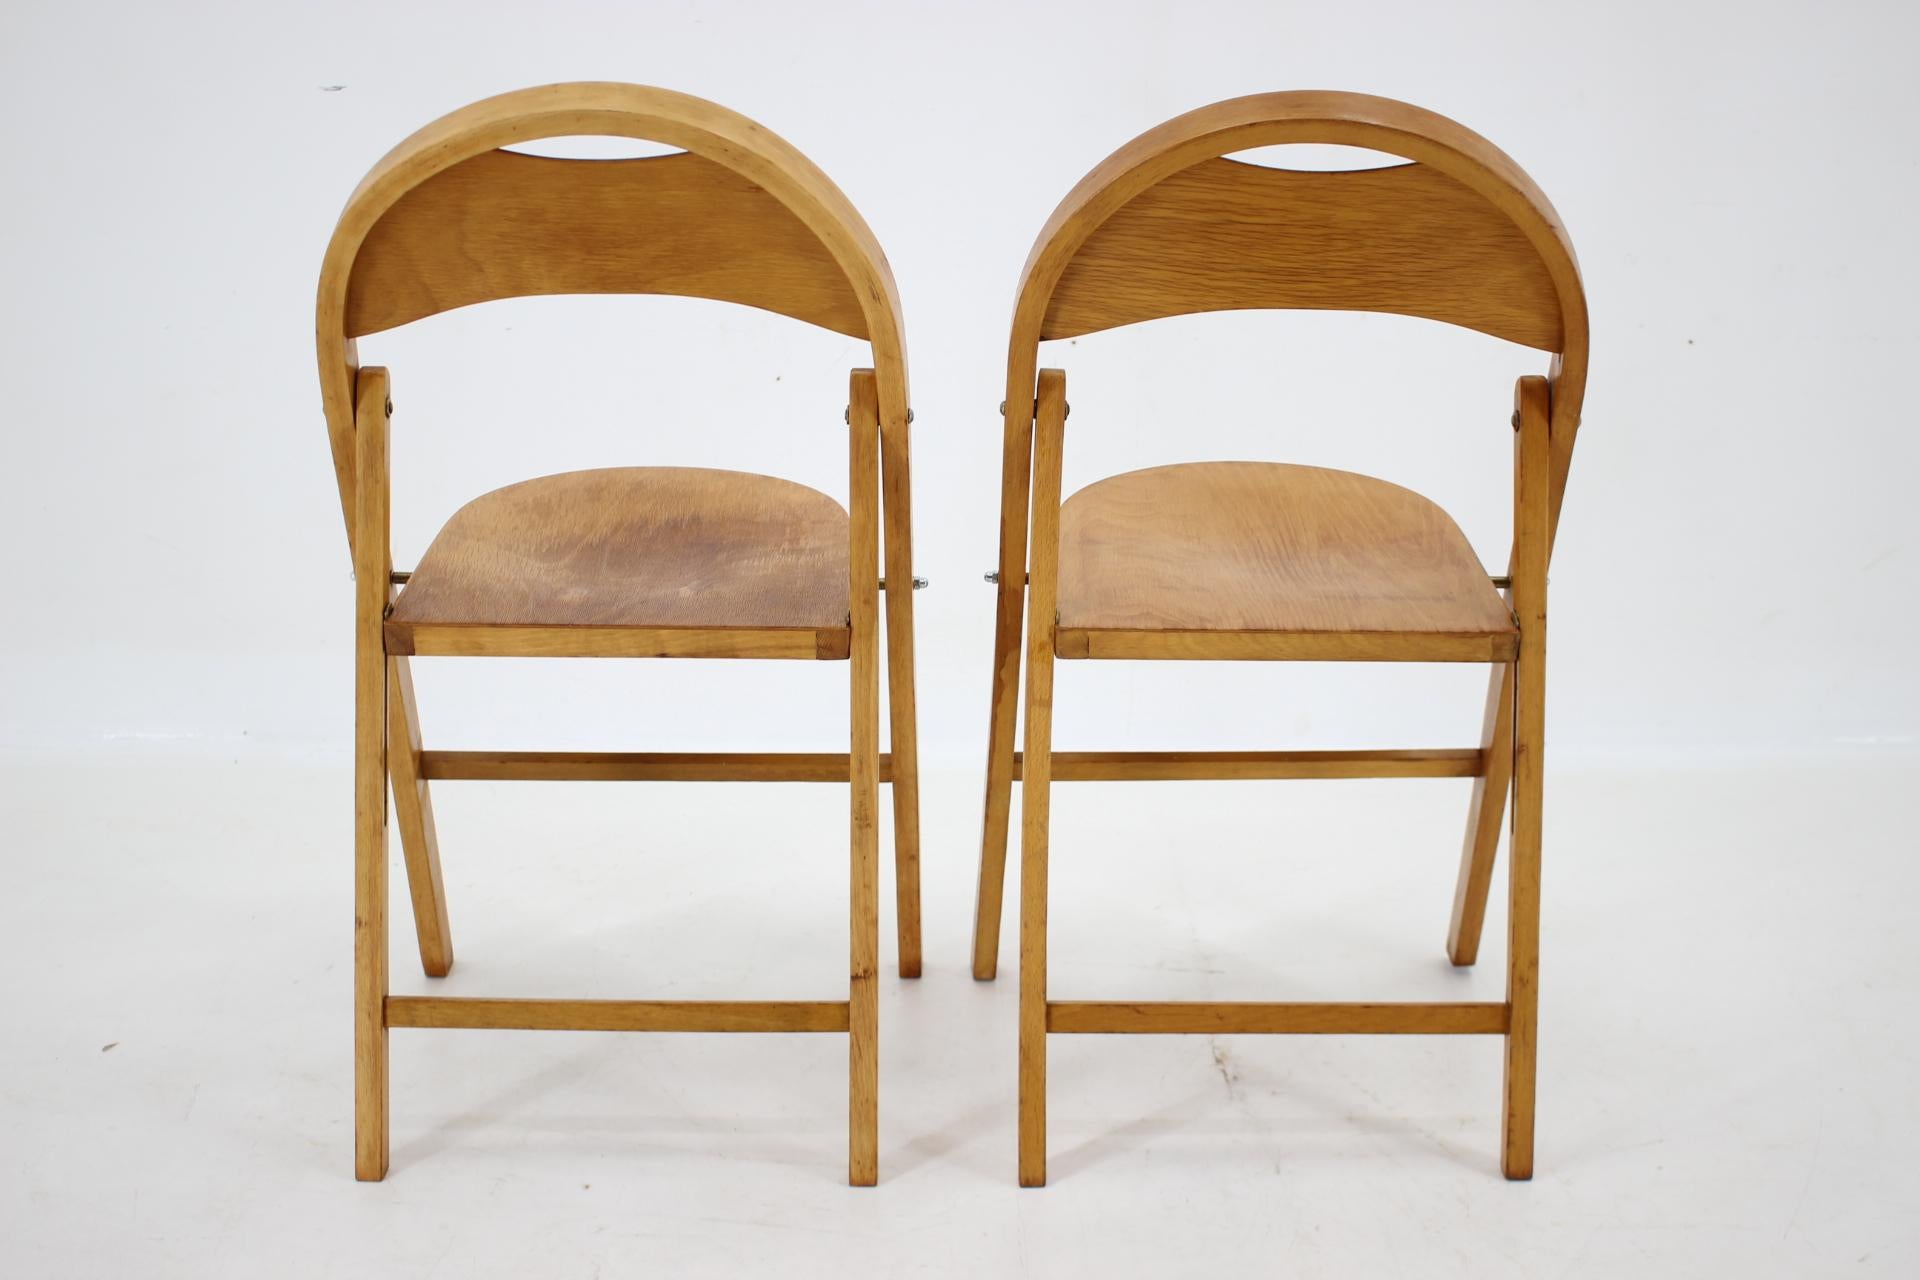 1950s Pair of B751 Folding Chair from Thonet/Ligna, Czechoslovakia For Sale 2